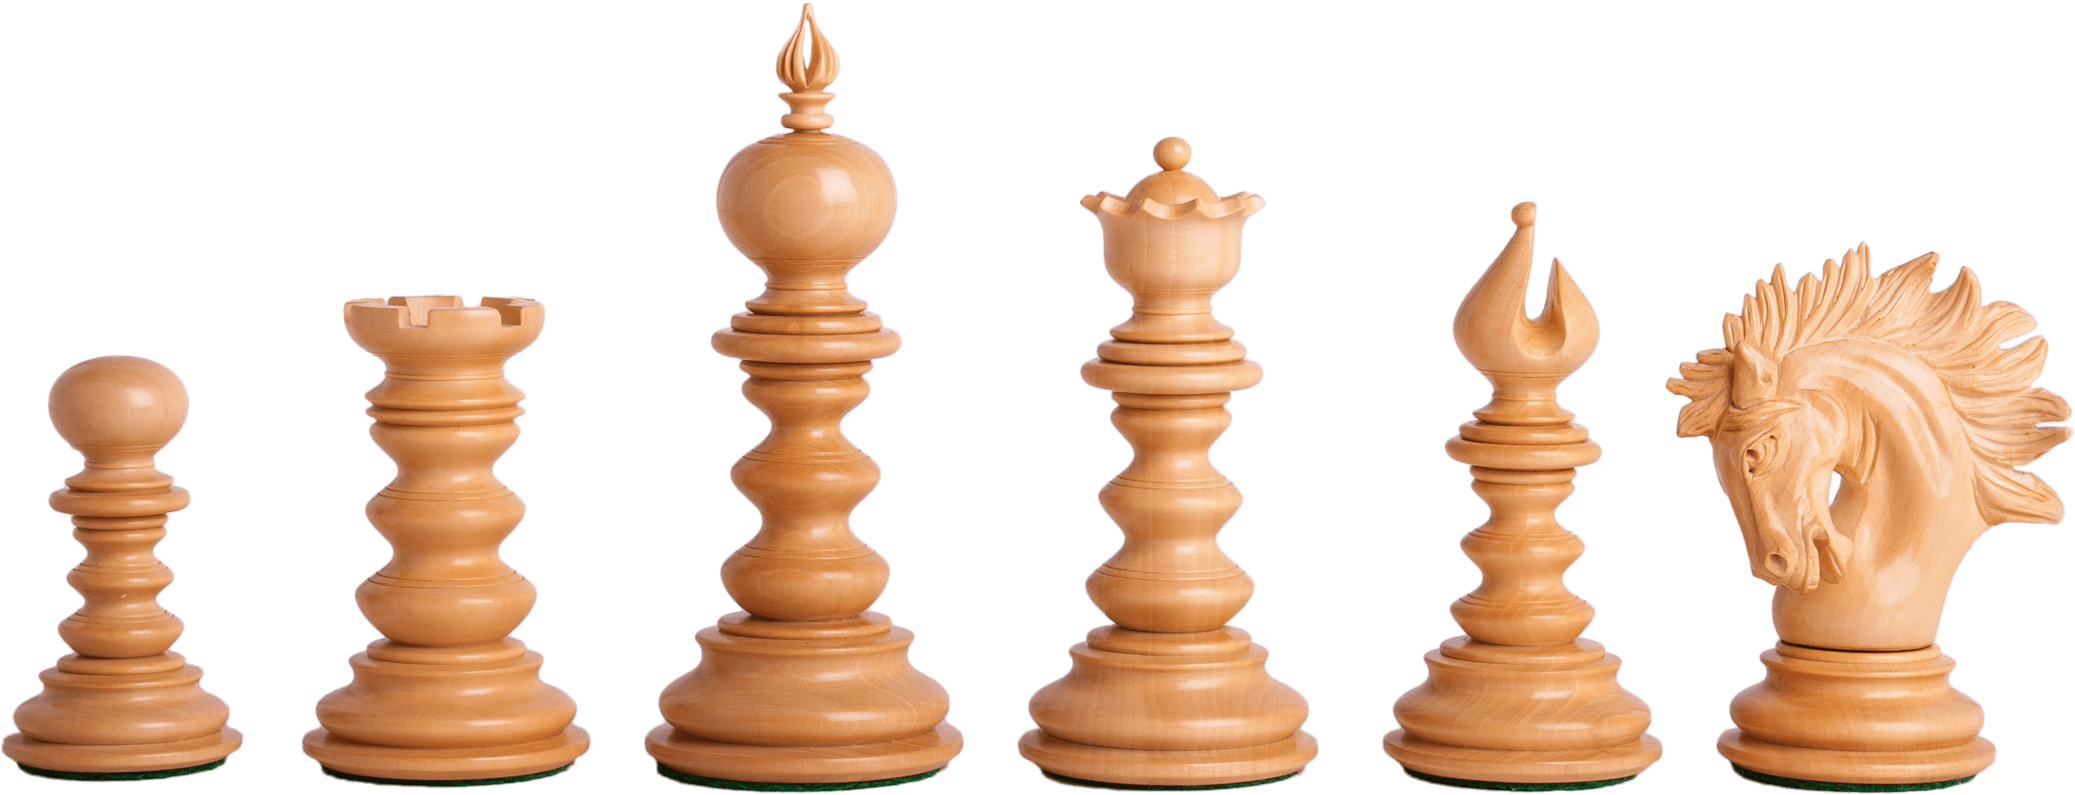 A Group Of Wooden Chess Pieces